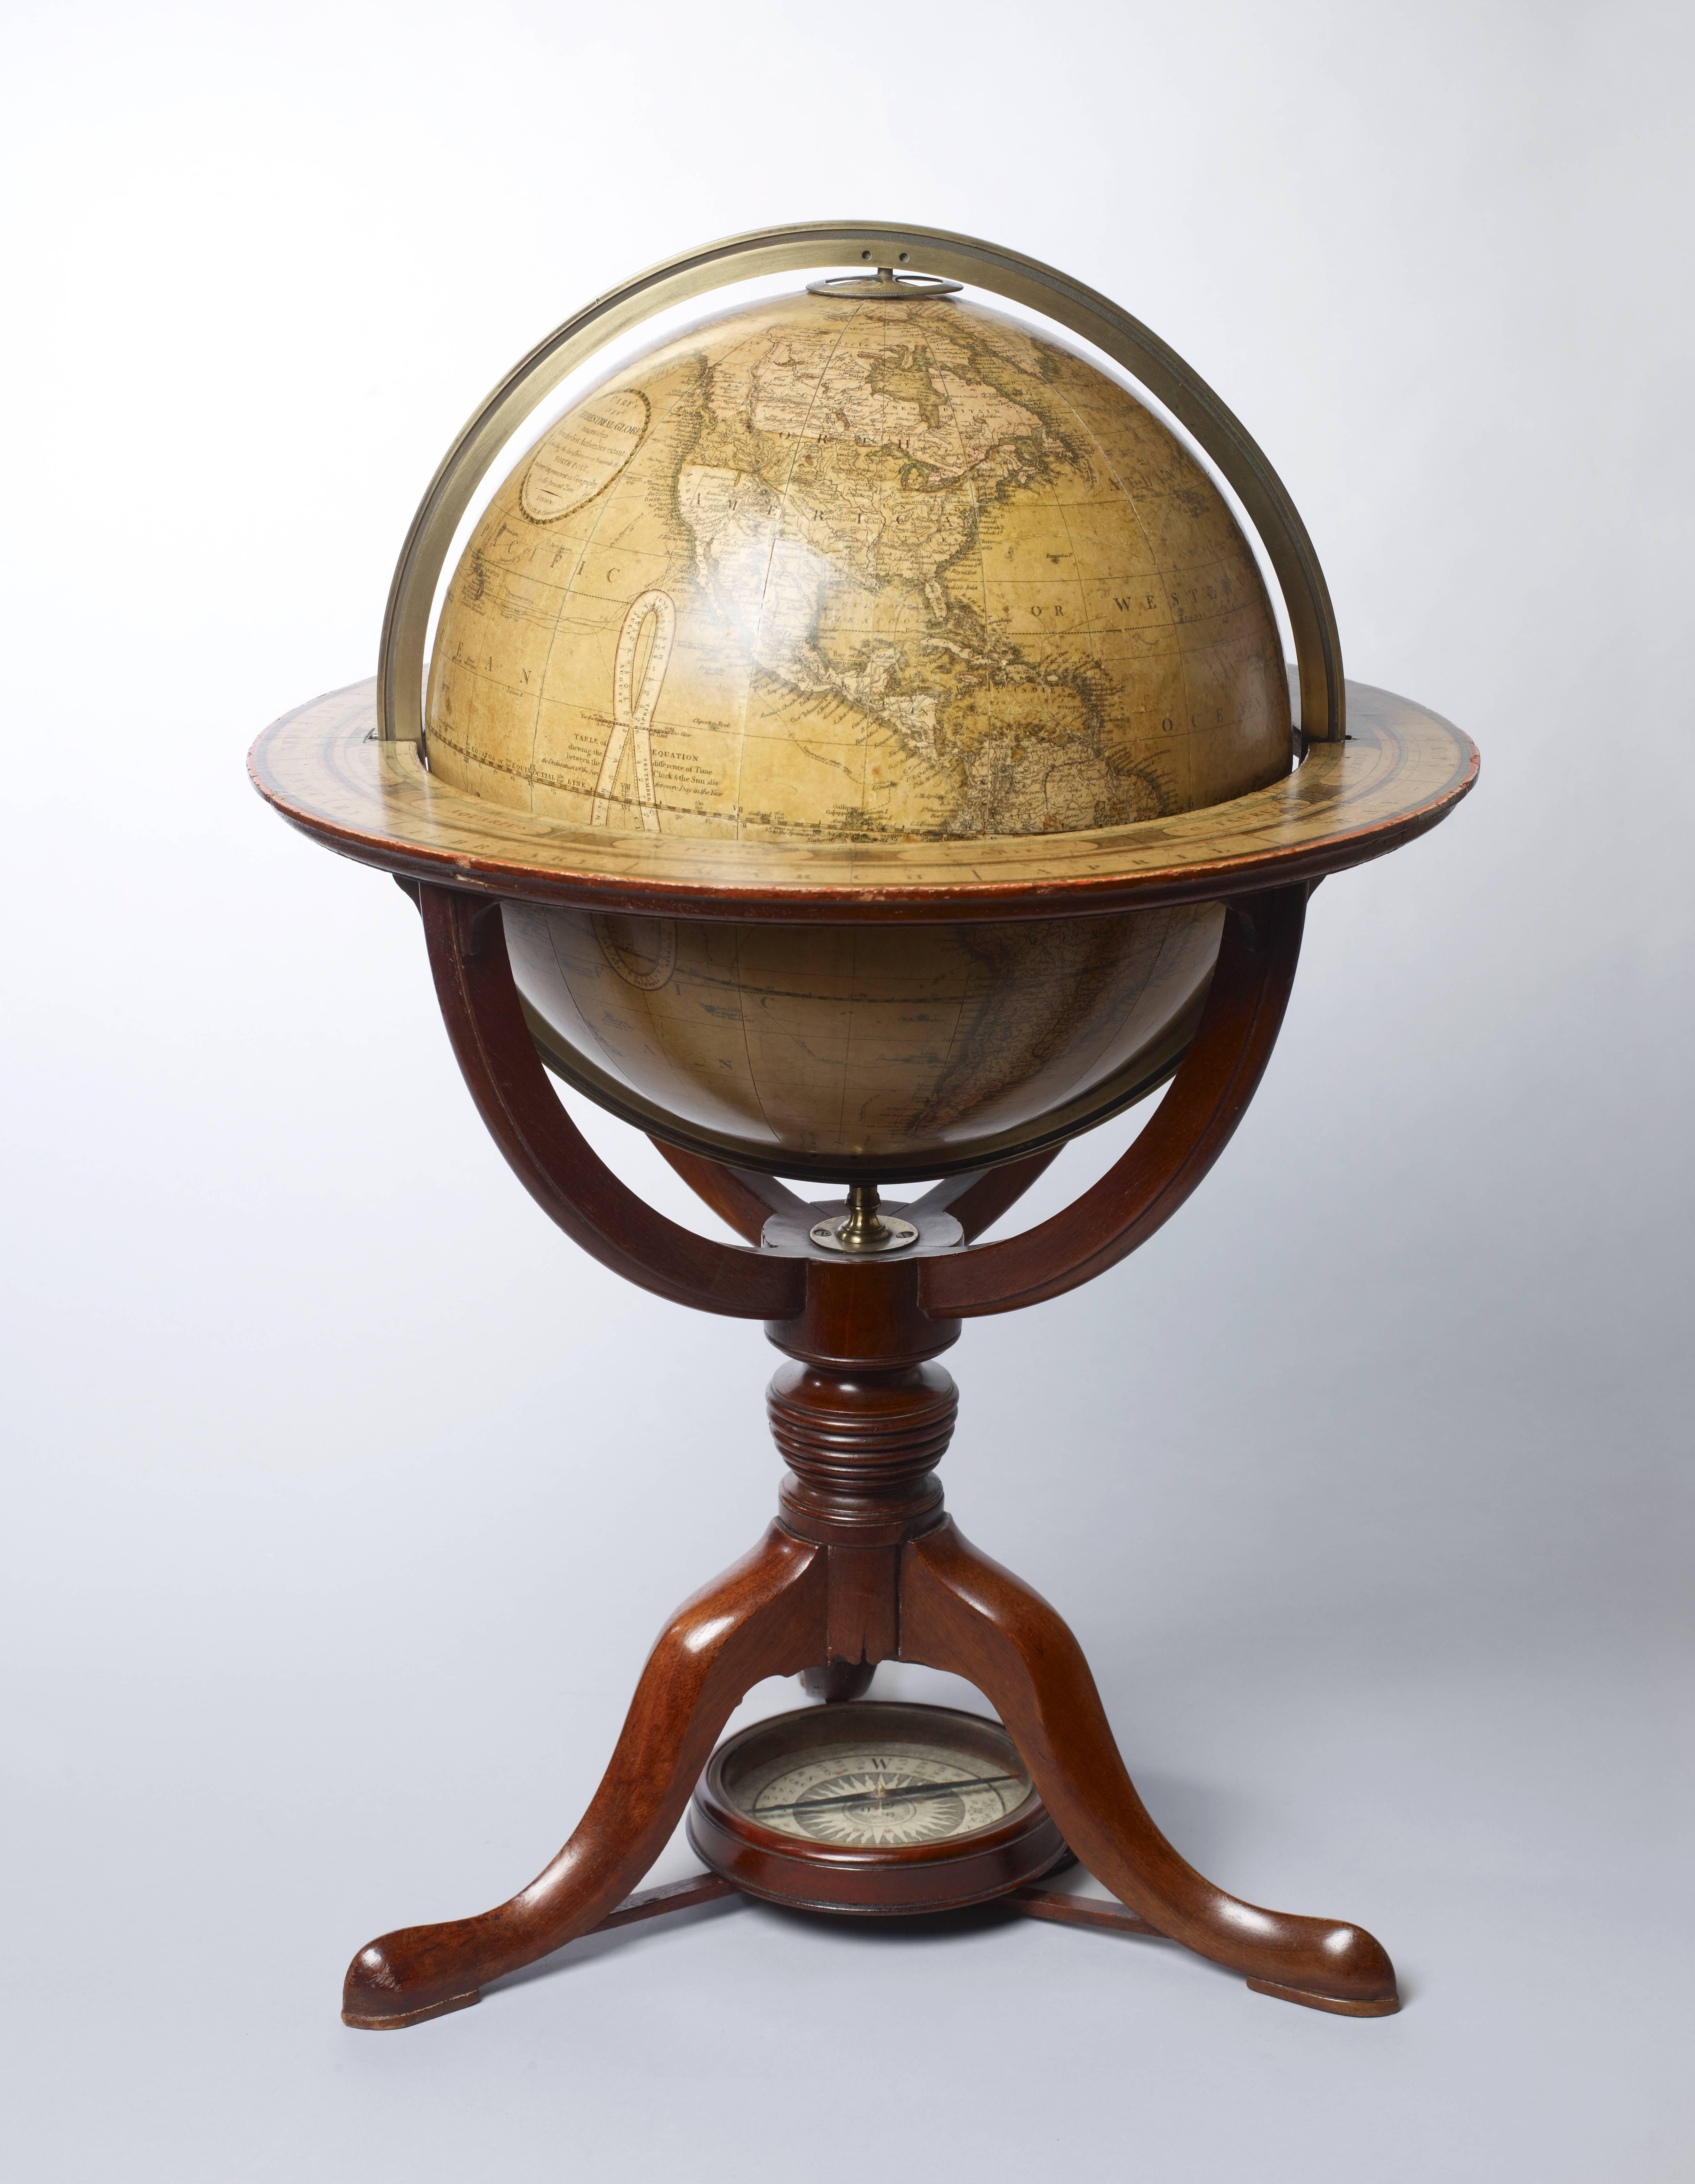 A pair of 8-inch terrestrial and celestial table globes on Regency mahogany stands.